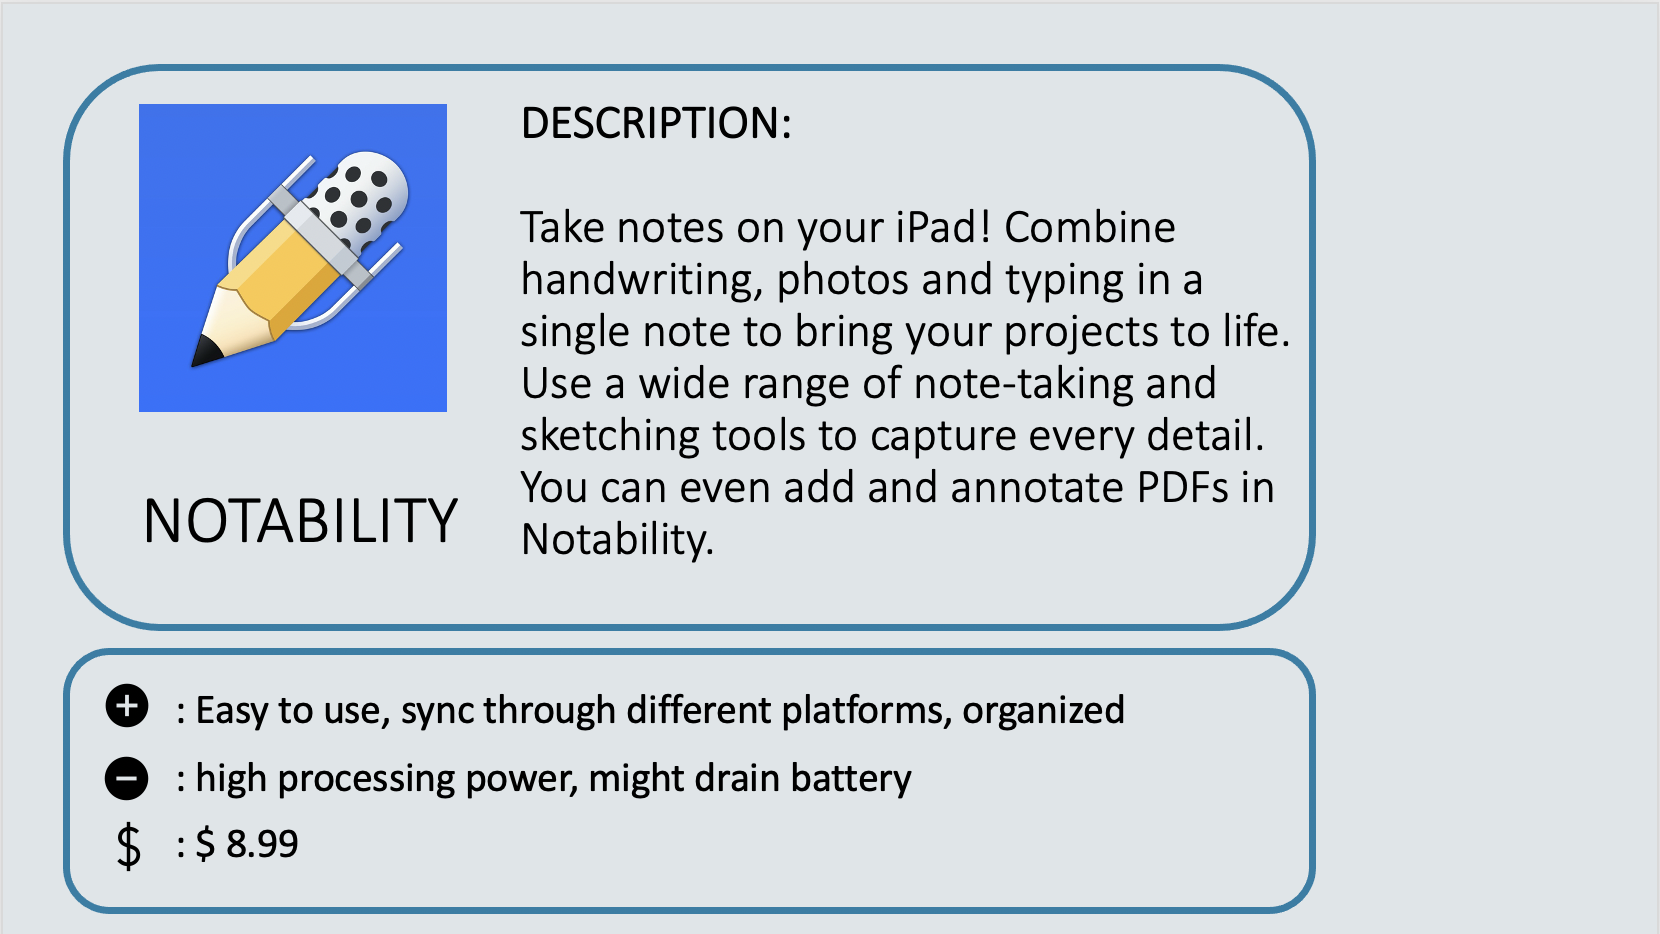 NOTABILITY - Take notes on your iPad! Combine handwriting, photos and typing in a single note to bring your projects to life. Use a wide range of note-taking and sketching tools to capture every detail. You can even add and annotate PDFs in Notability. Positive: Easy to use, sync through different platforms, organized. Negative: High processing power, might drain battery. Cost: $8.99